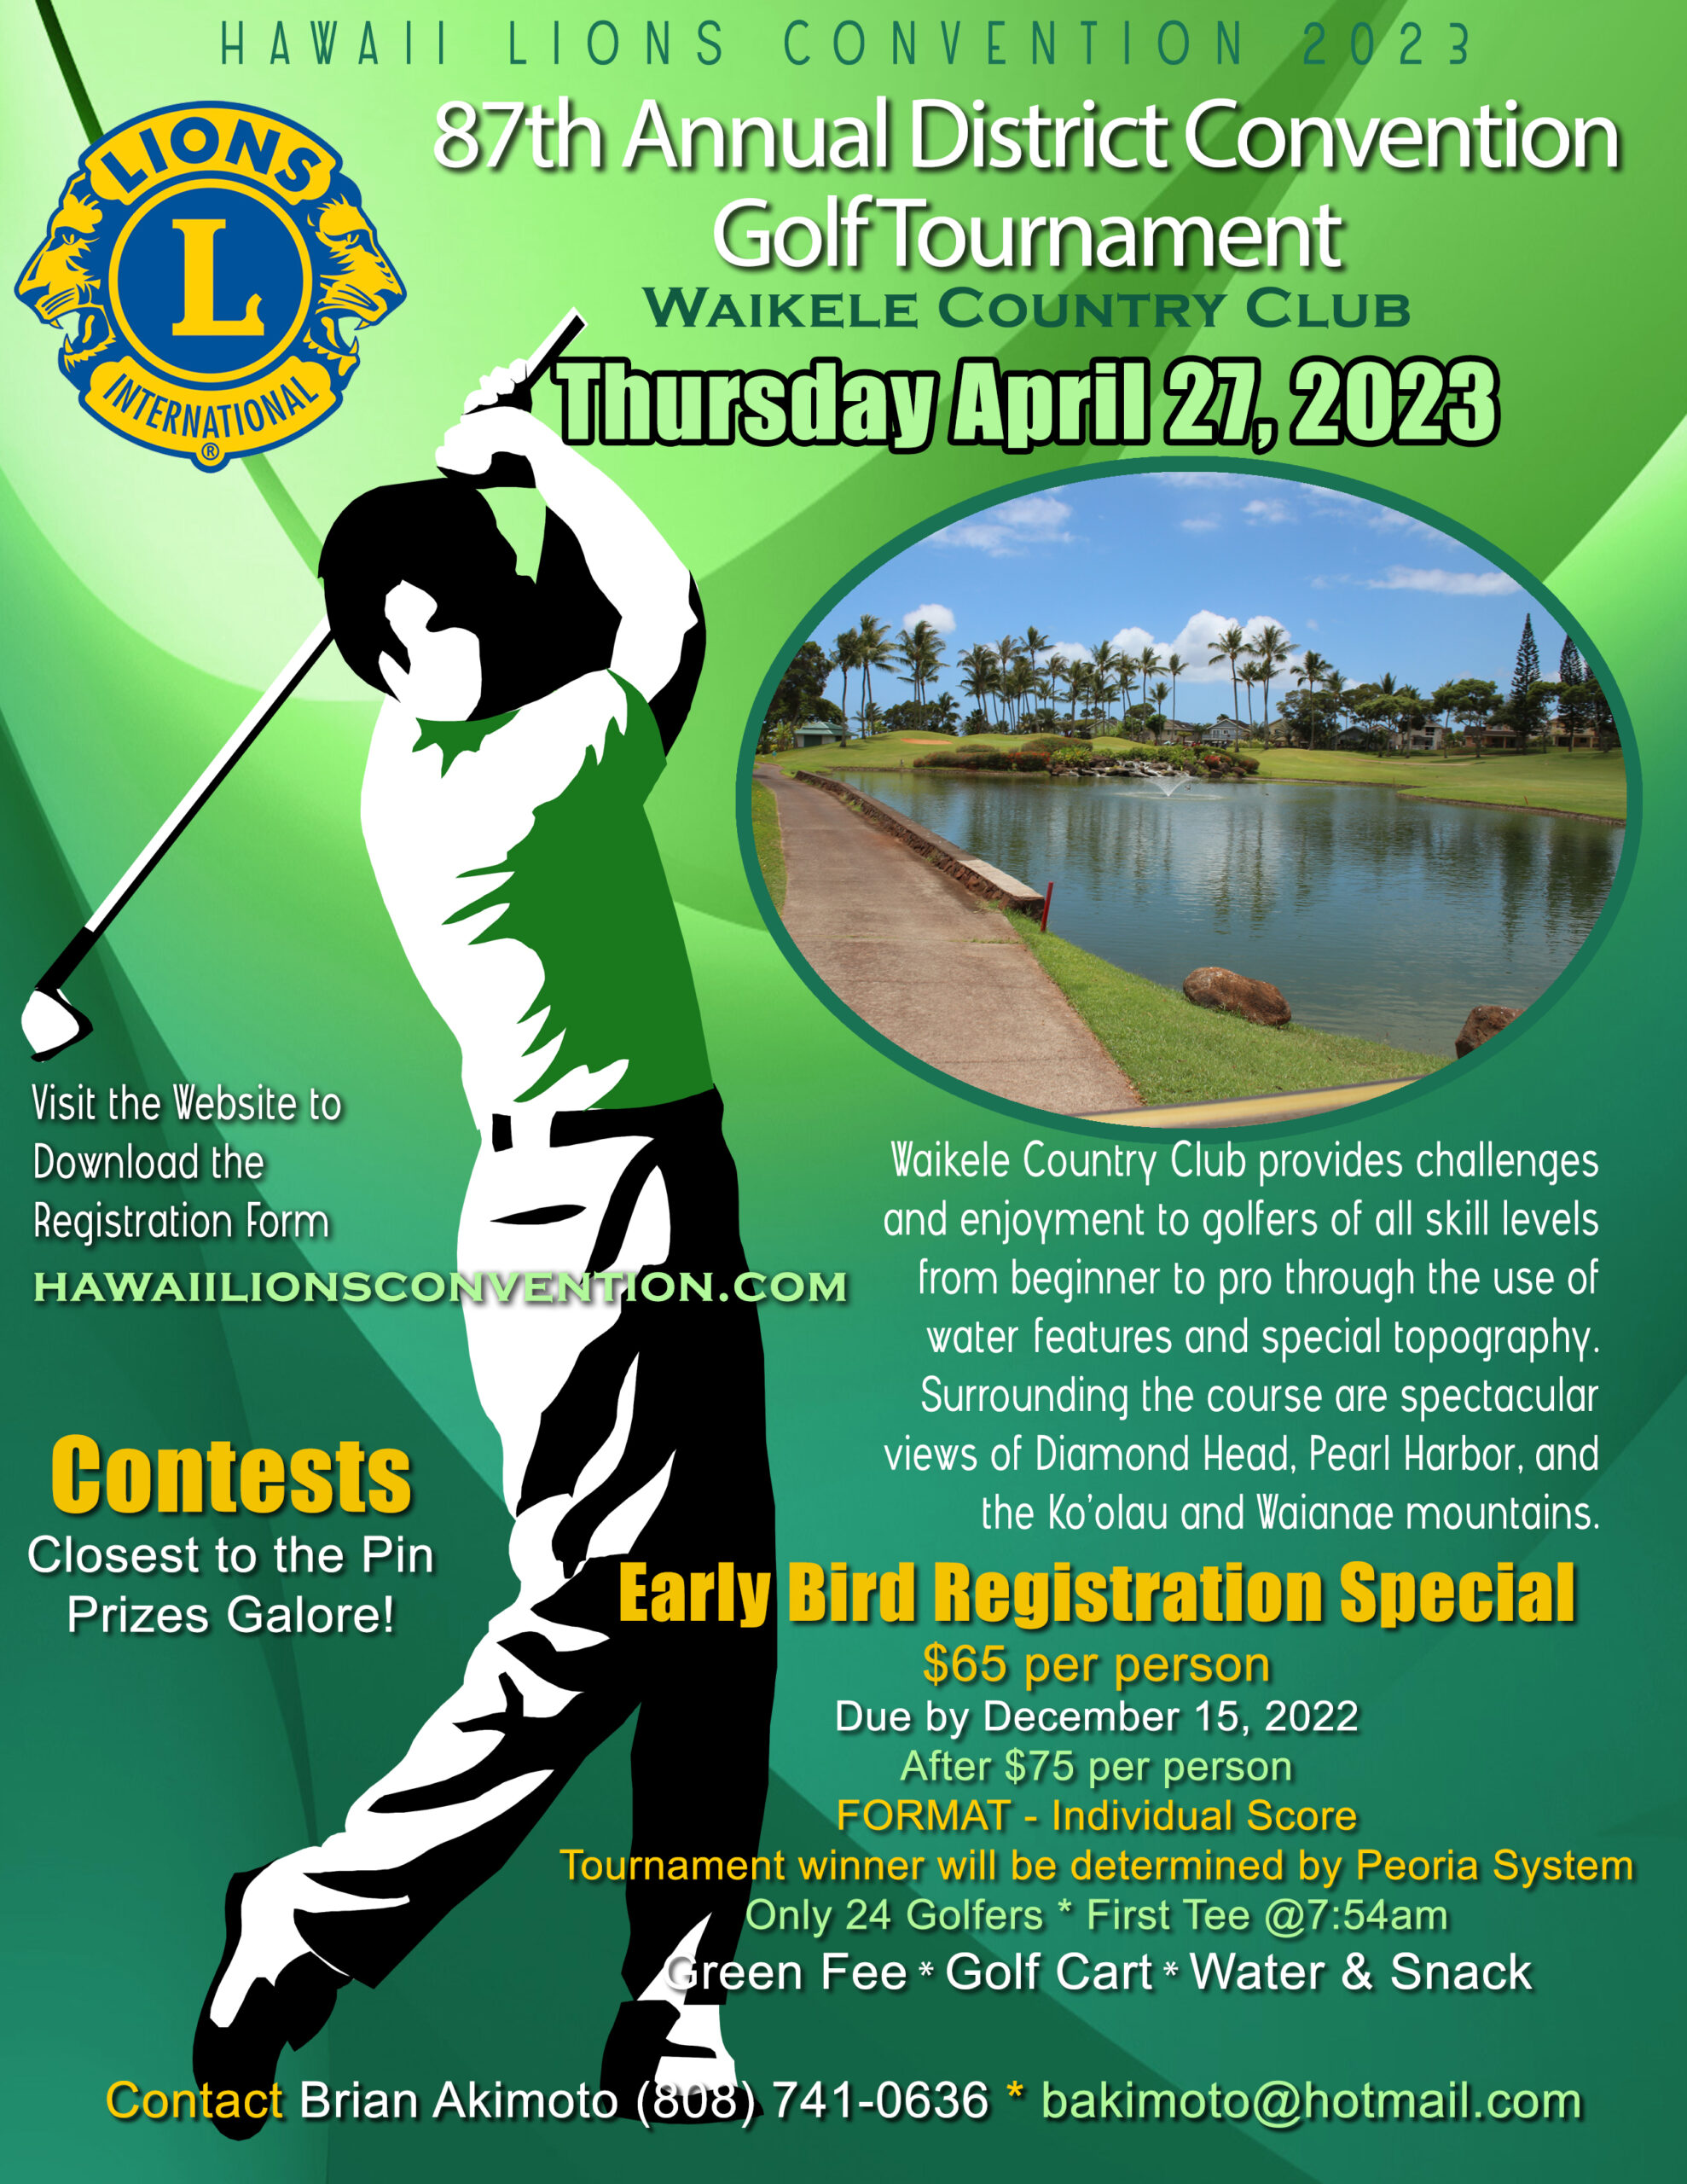 87th Hawaii Lions Convention 2023 - Golf Tournament